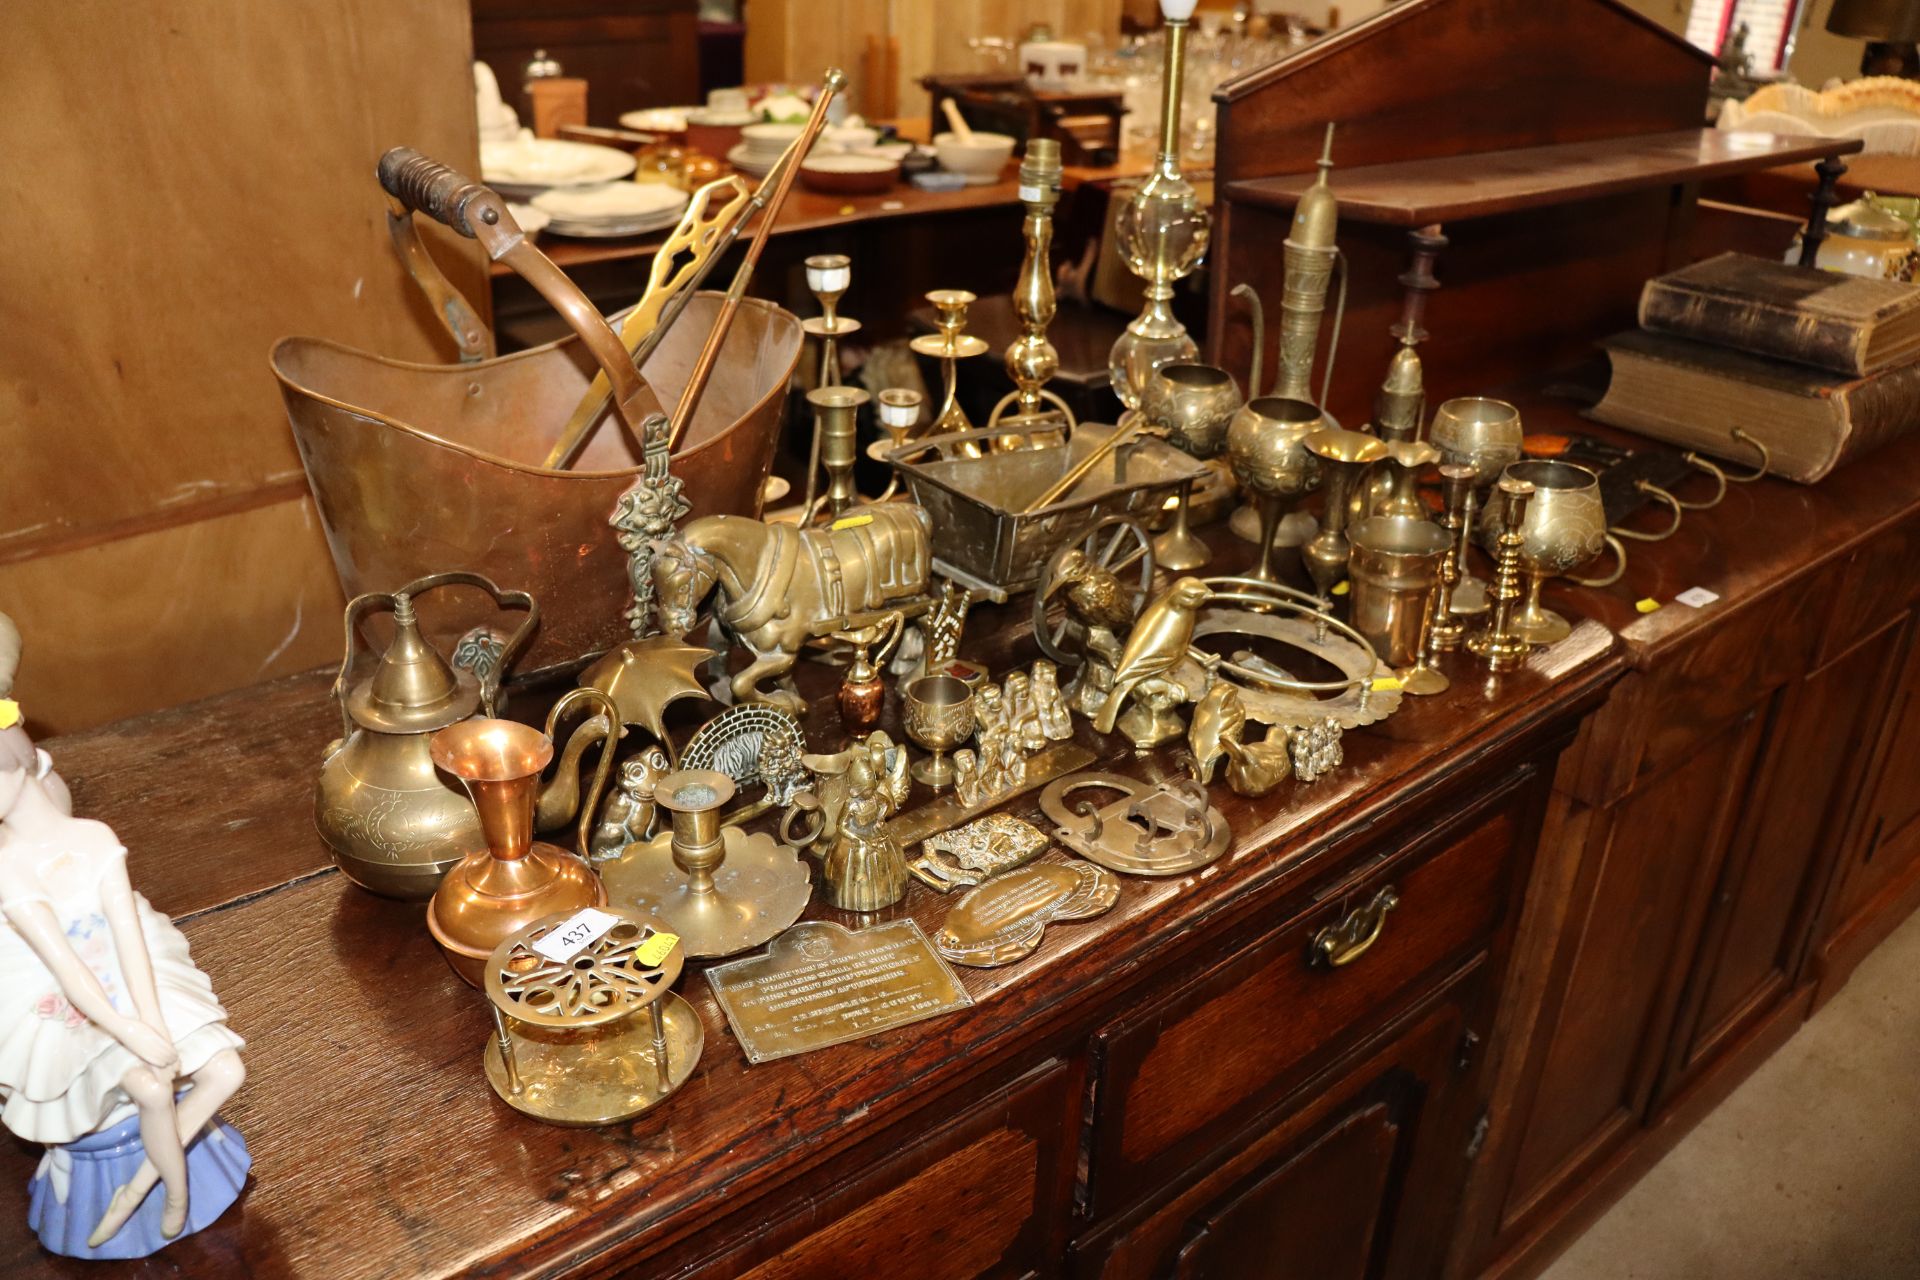 A collection of miscellaneous brass and copperware